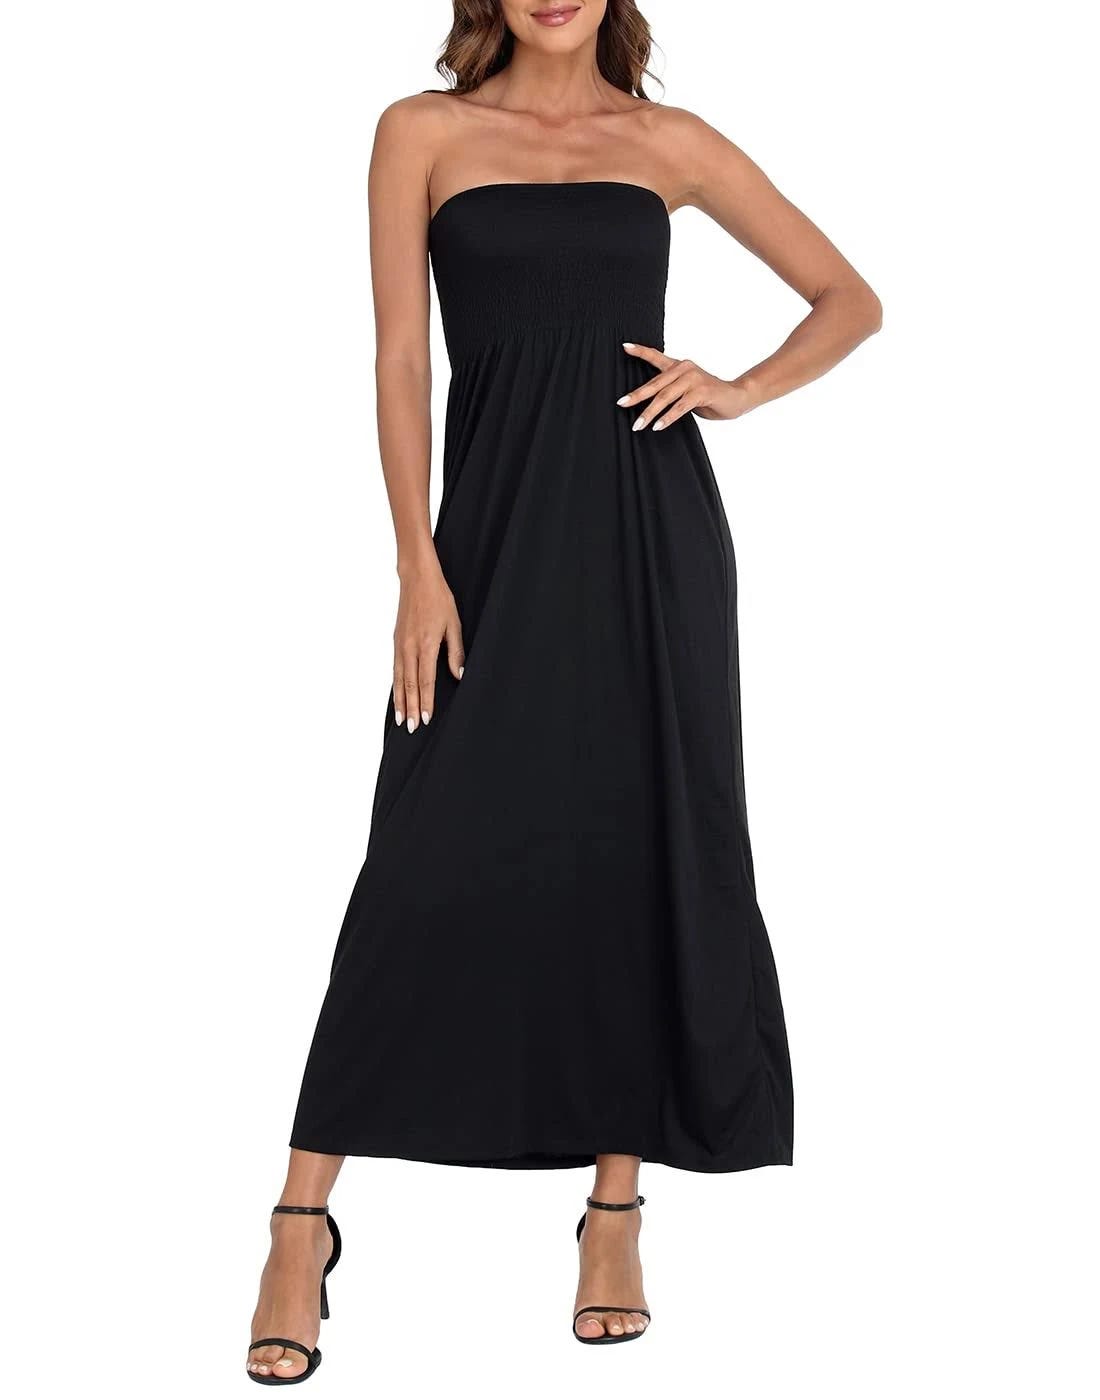 Strapless Maxi Dress - Lightweight, Breathable, and Stylish Coverup for Women | Image